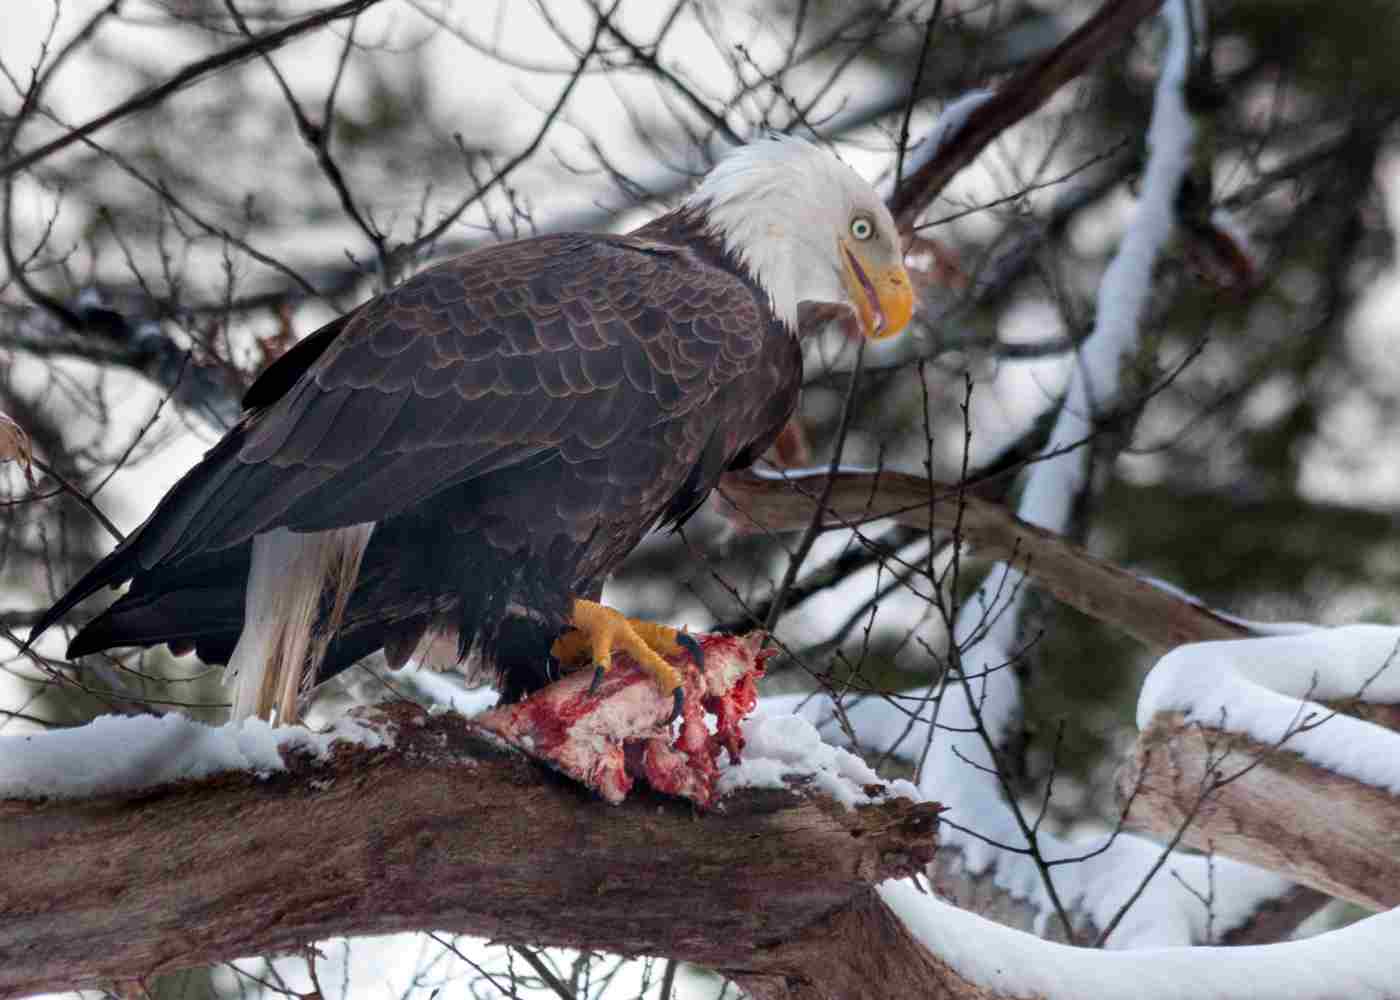 Are Eagles Omnivores: Bald Eagles are Carnivores that Feed Only On Animal Biomass (Credit: Paul VanDerWerf 2017, Uploaded Online 2019 .CC BY 2.0.)